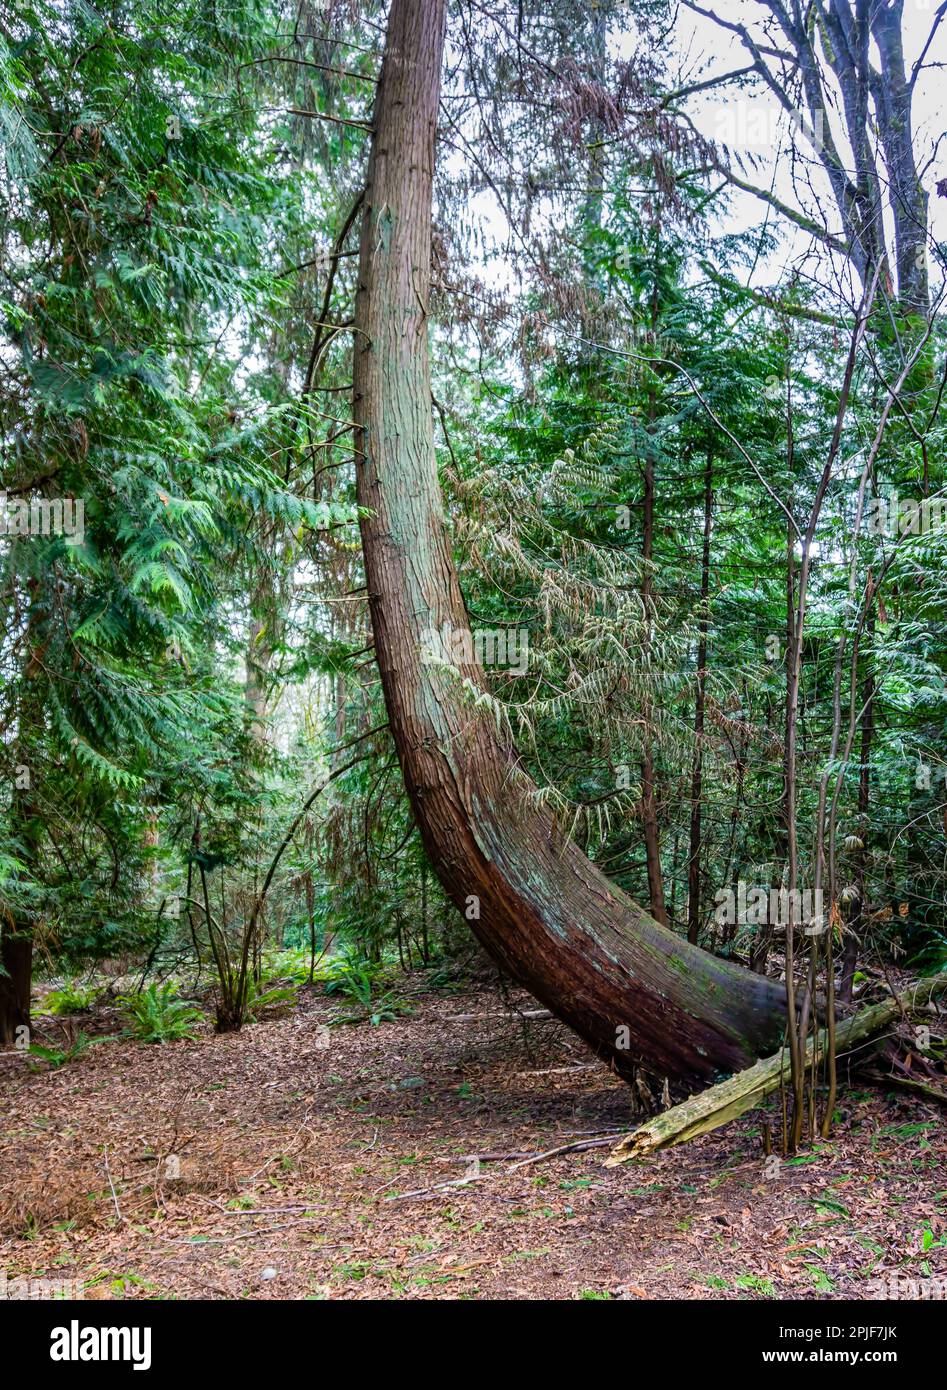 A curved tree along a trail at Bellevue Botanical Garden in Washington State. Stock Photo